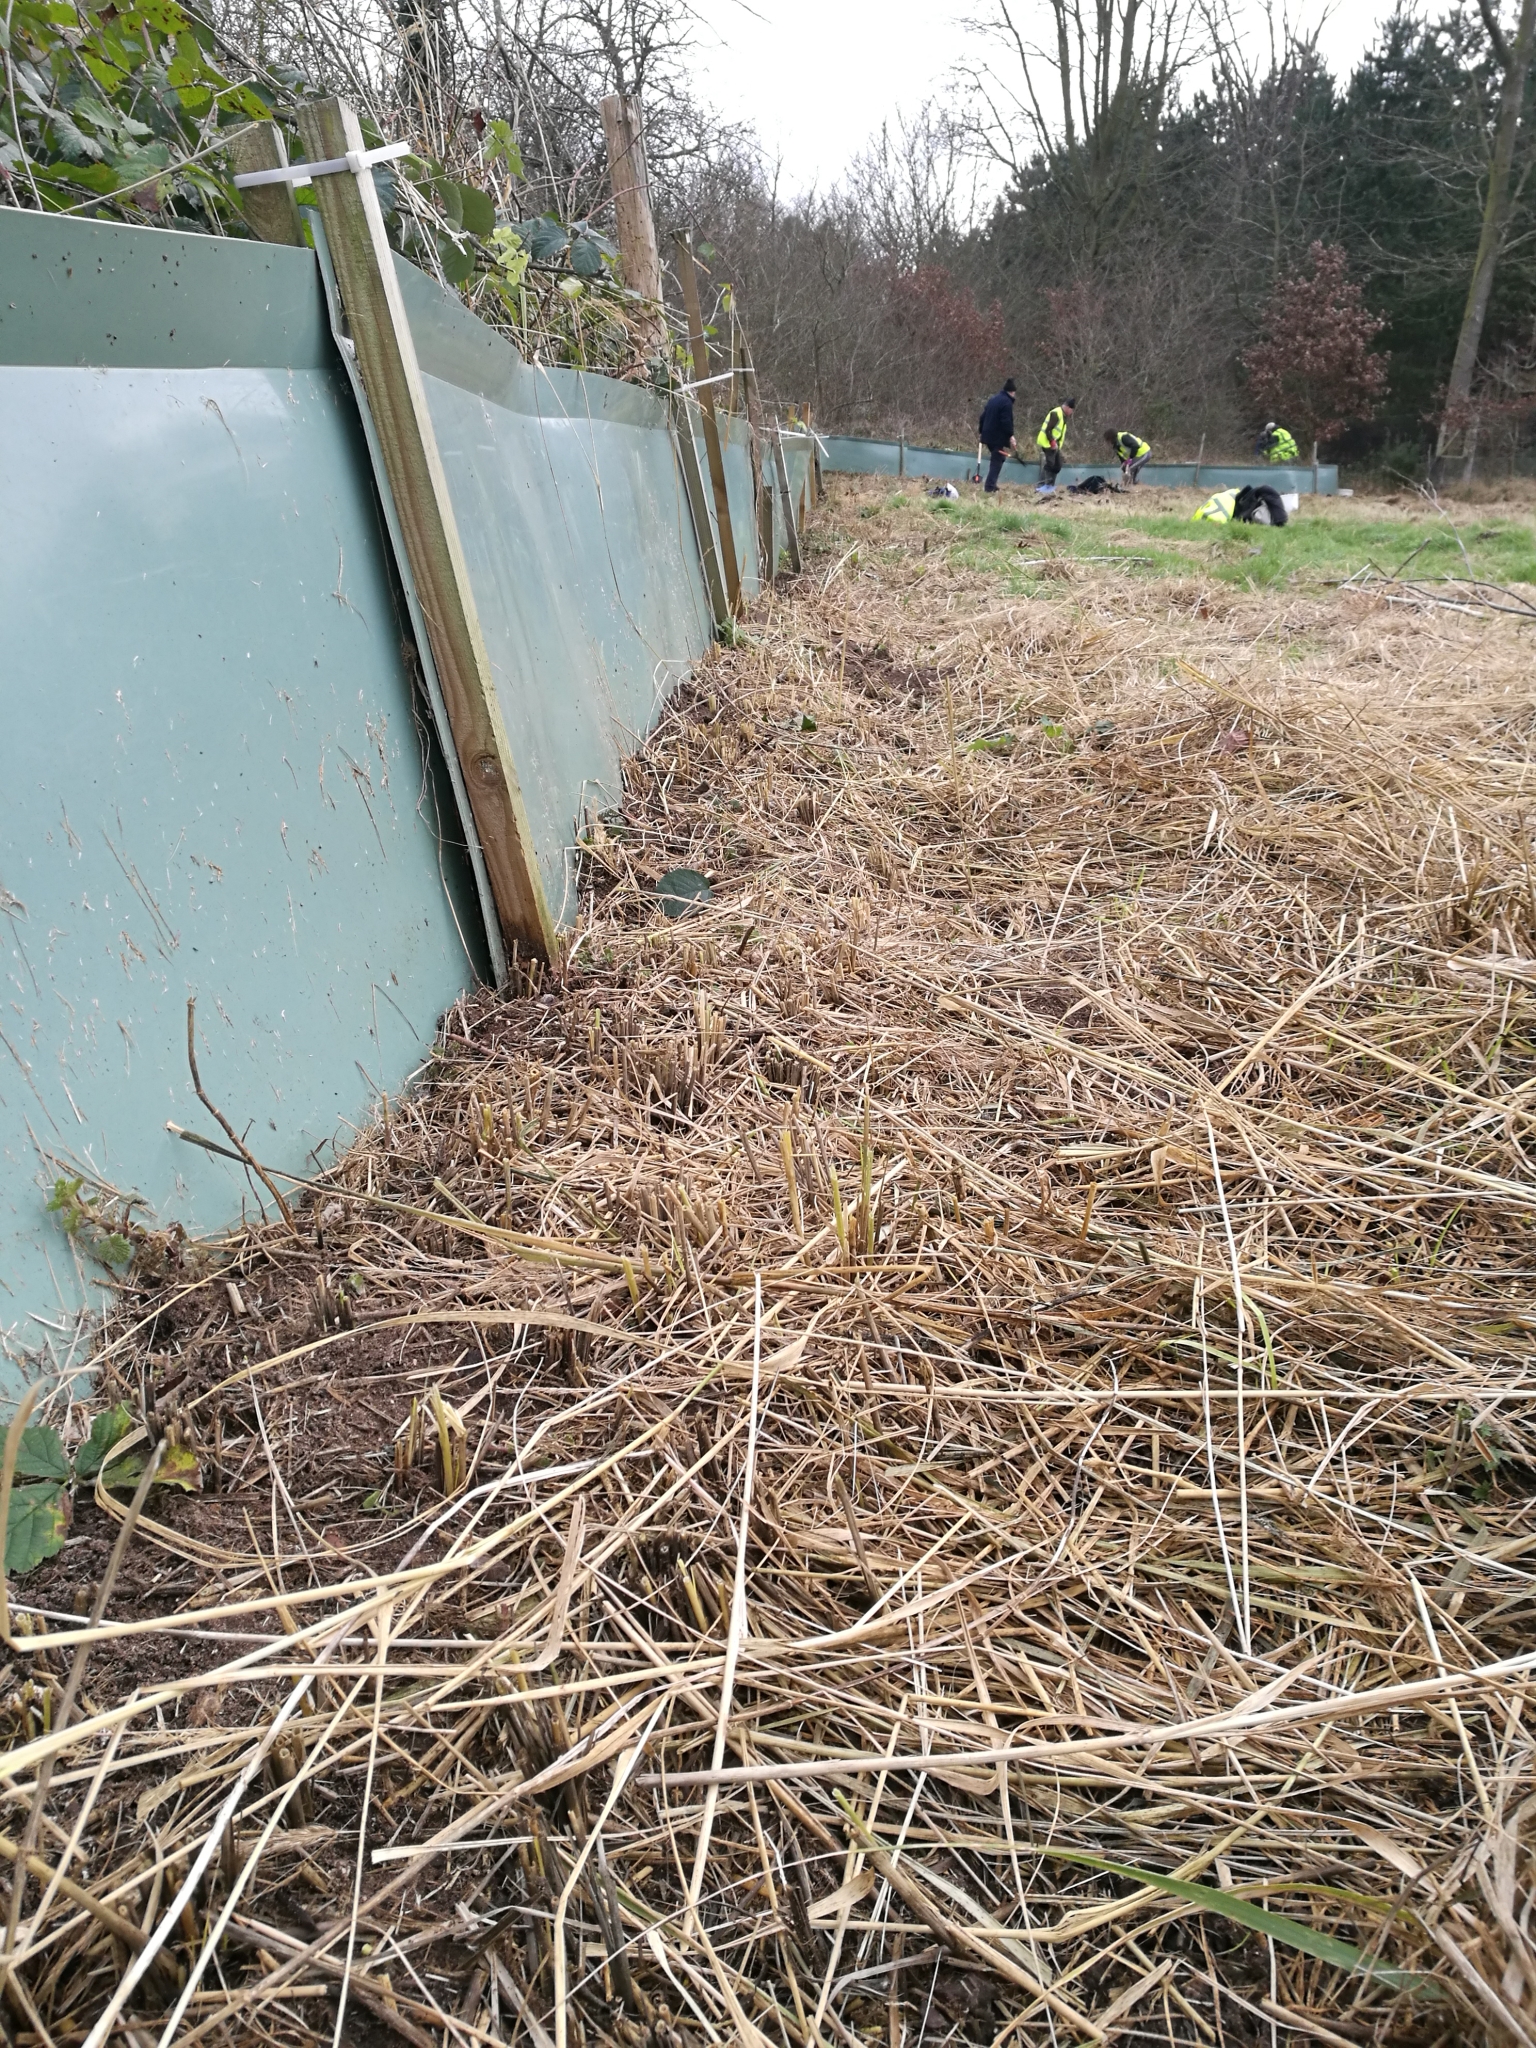 A photo from the FoTF Conservation Event - January 2022 - Erection of toad fence : A section of the toad fence, with volunteers working in the background